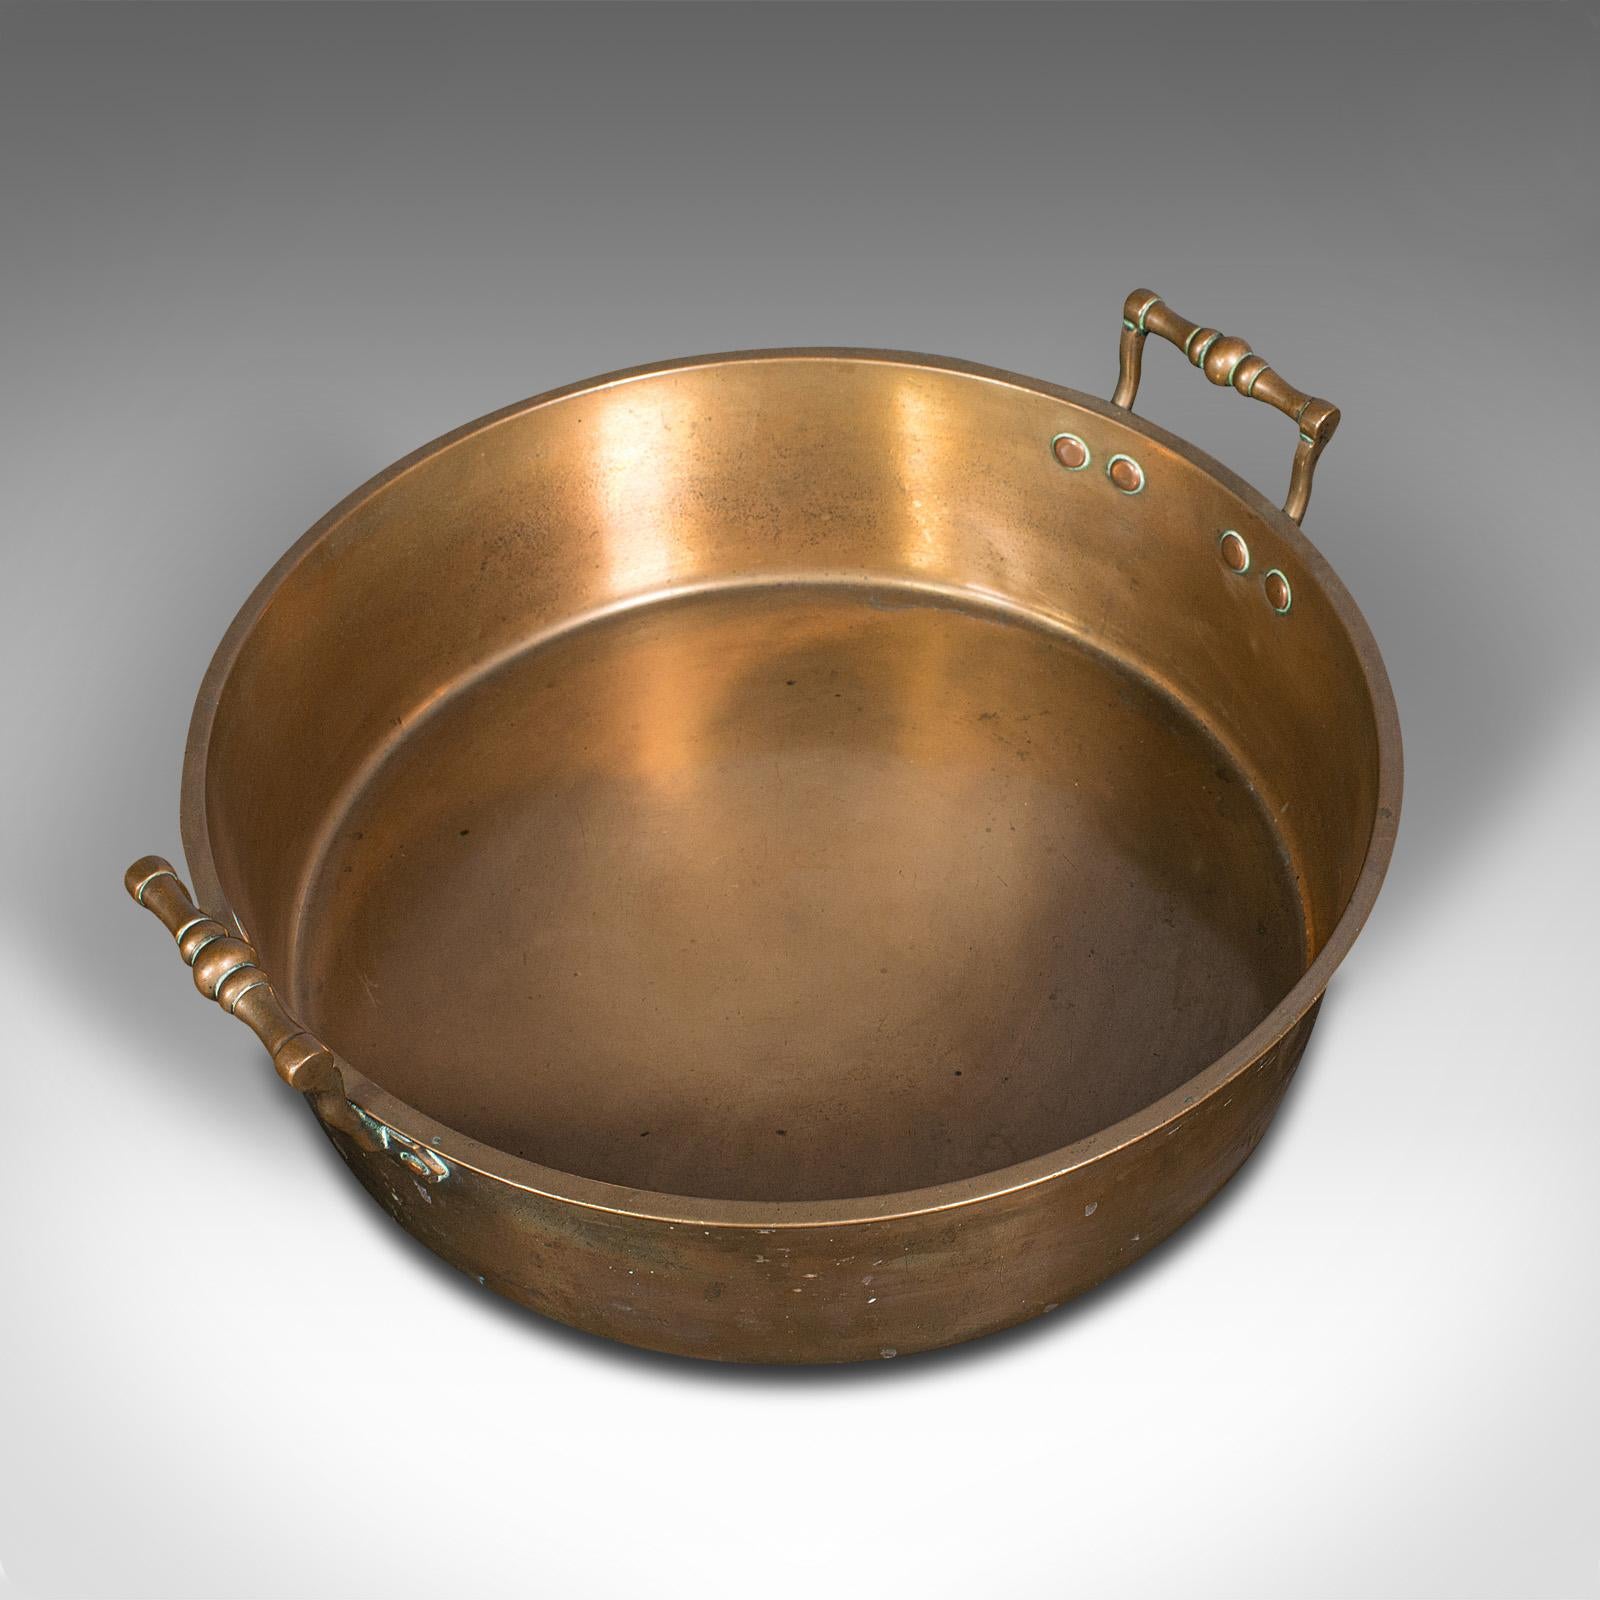 British Antique Country House Braising Pan, English, Bronze, Cooking Pot, Victorian For Sale